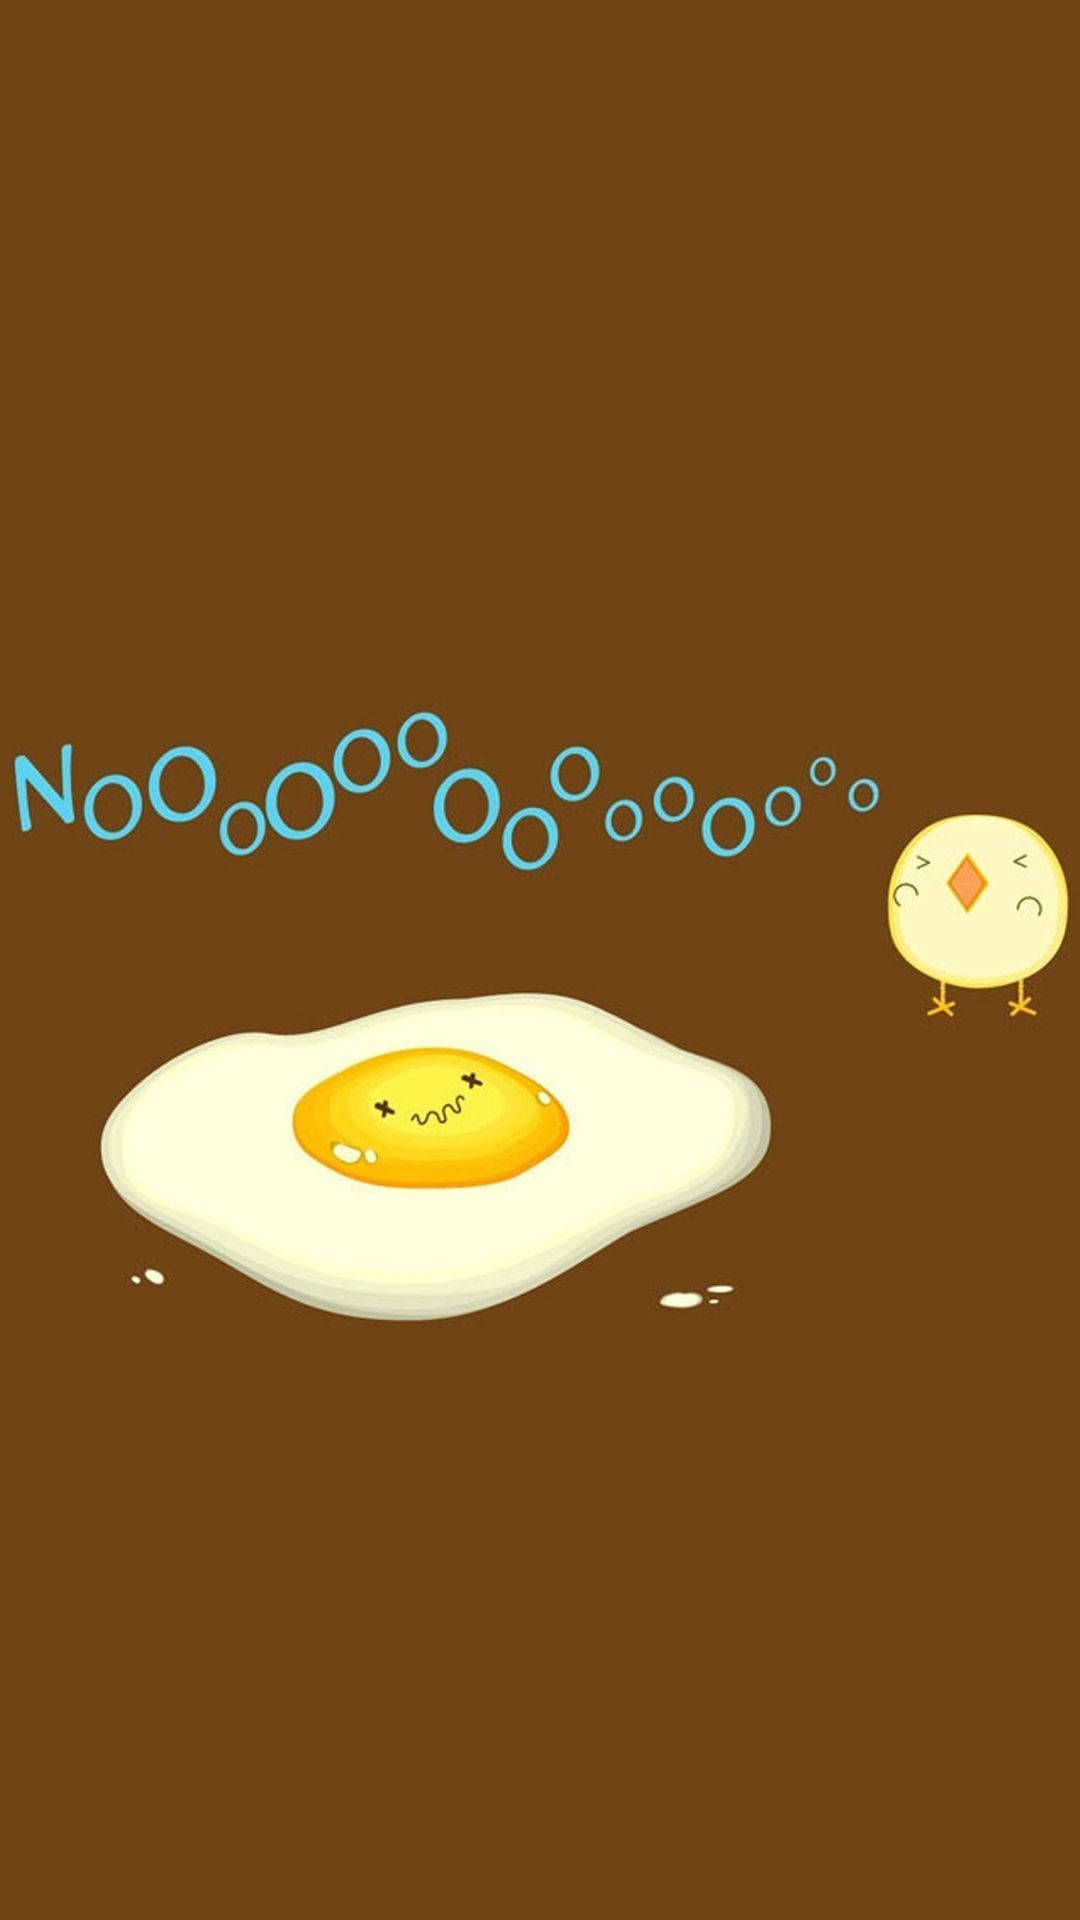 A cartoon of an egg with bubbles coming out - Egg